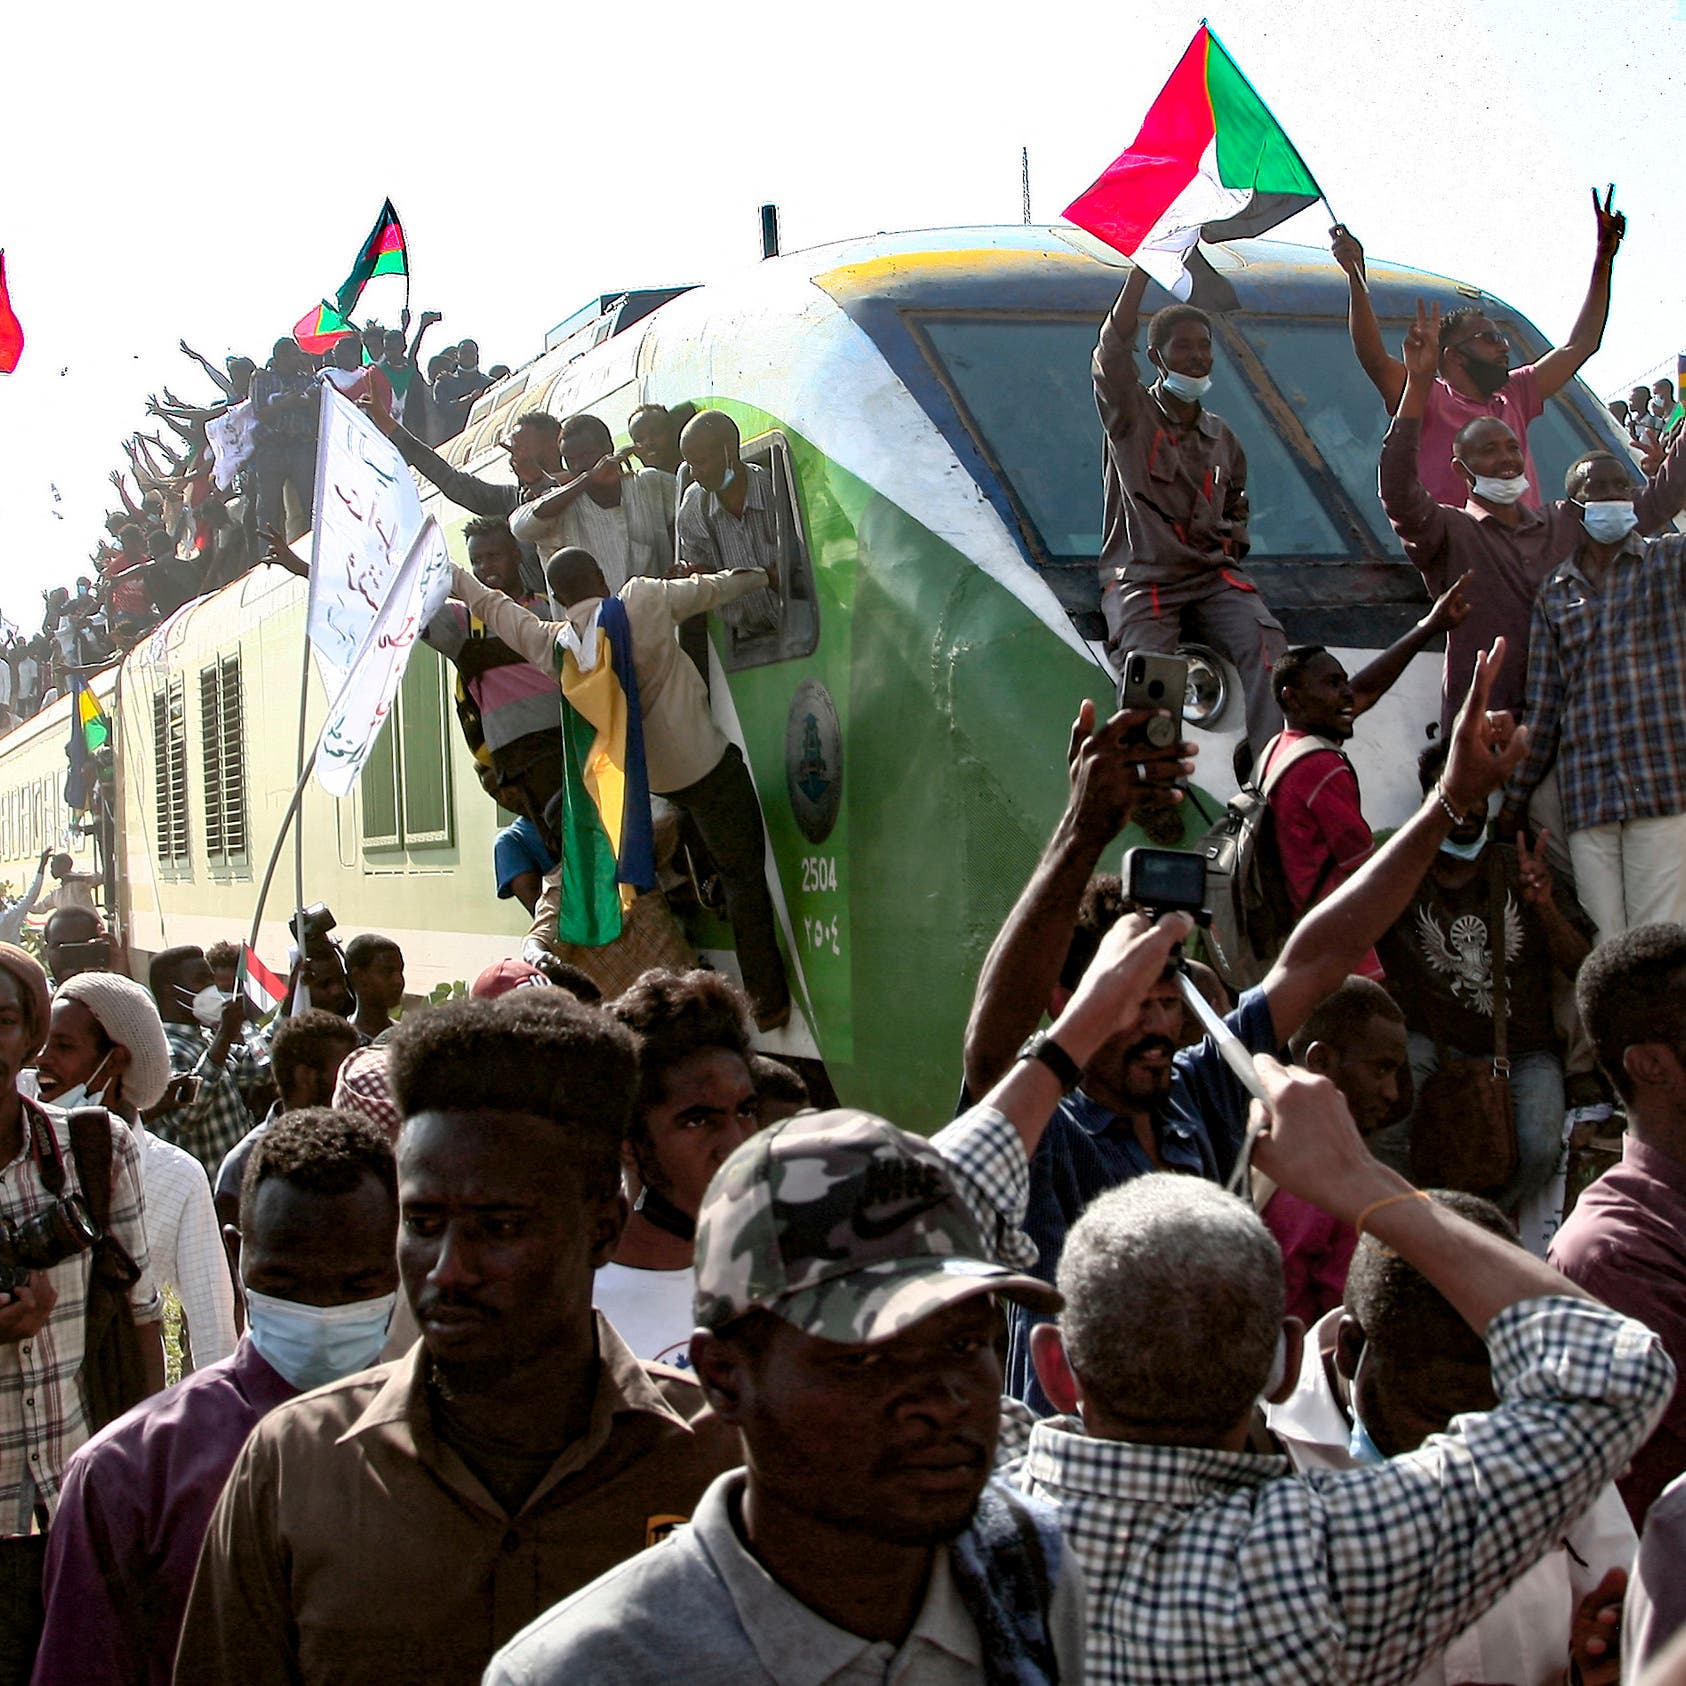 Sudanese protesters demand civilian rule, want army out